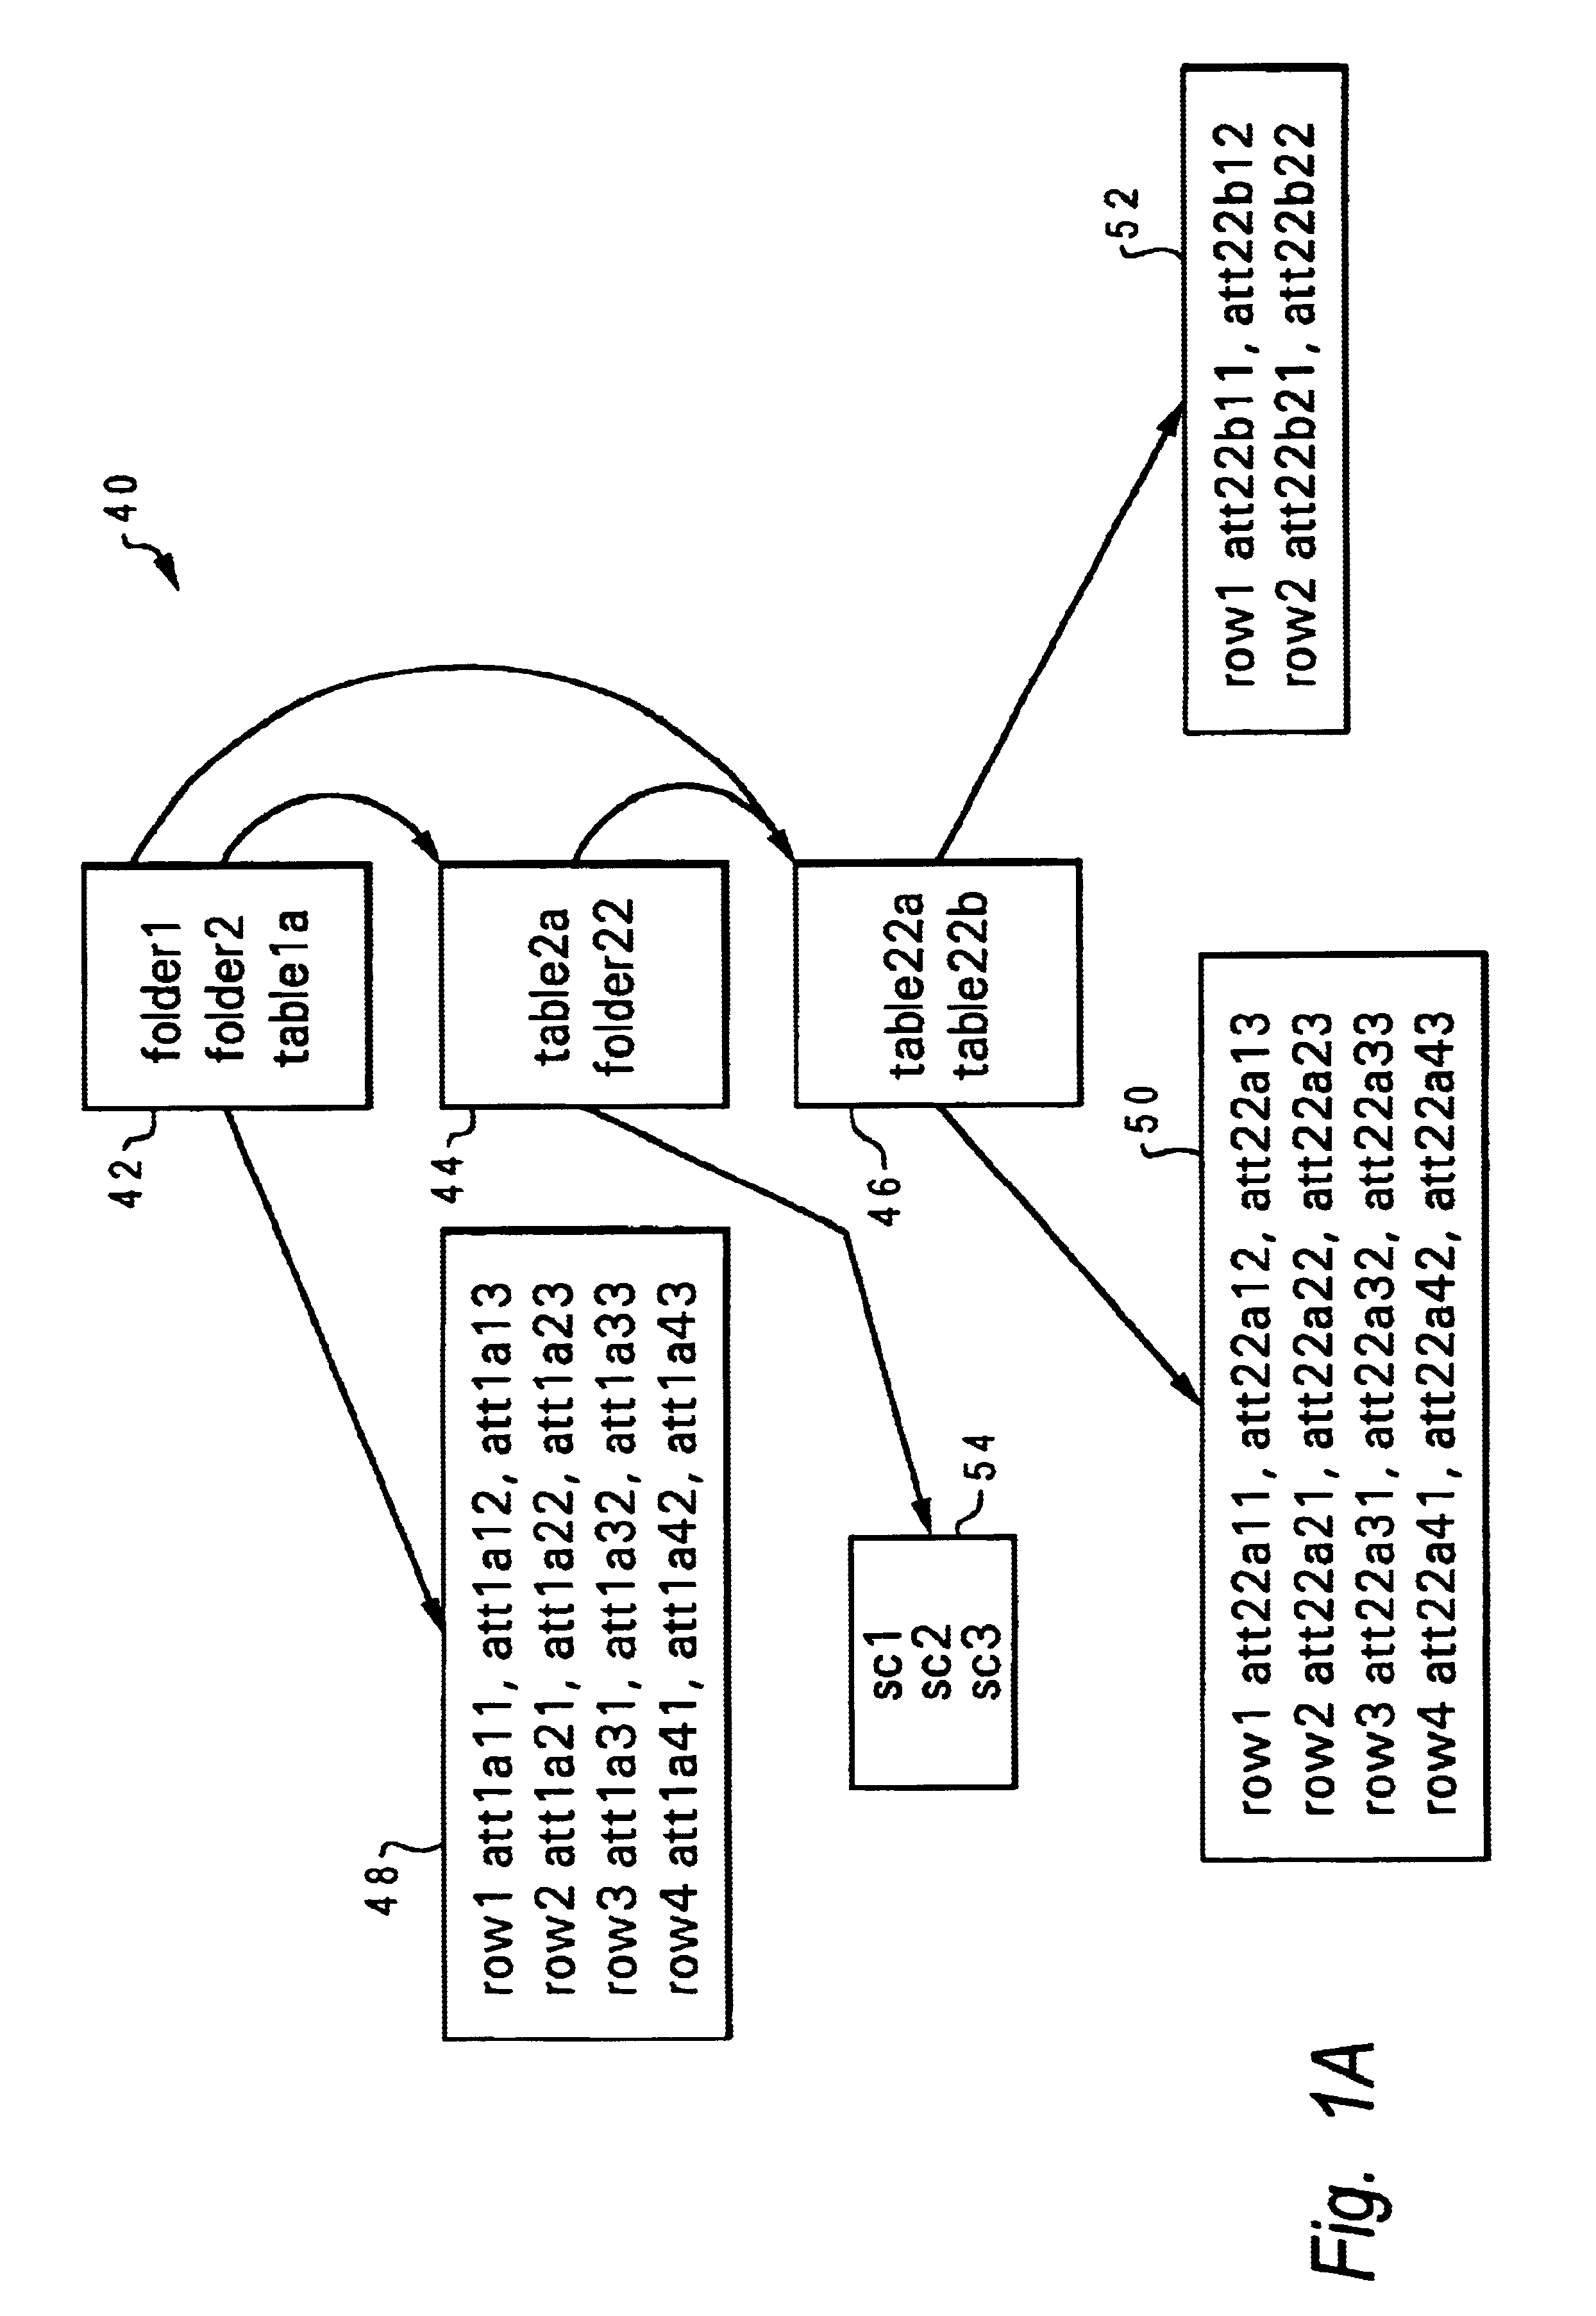 Command line interface for a data processing system